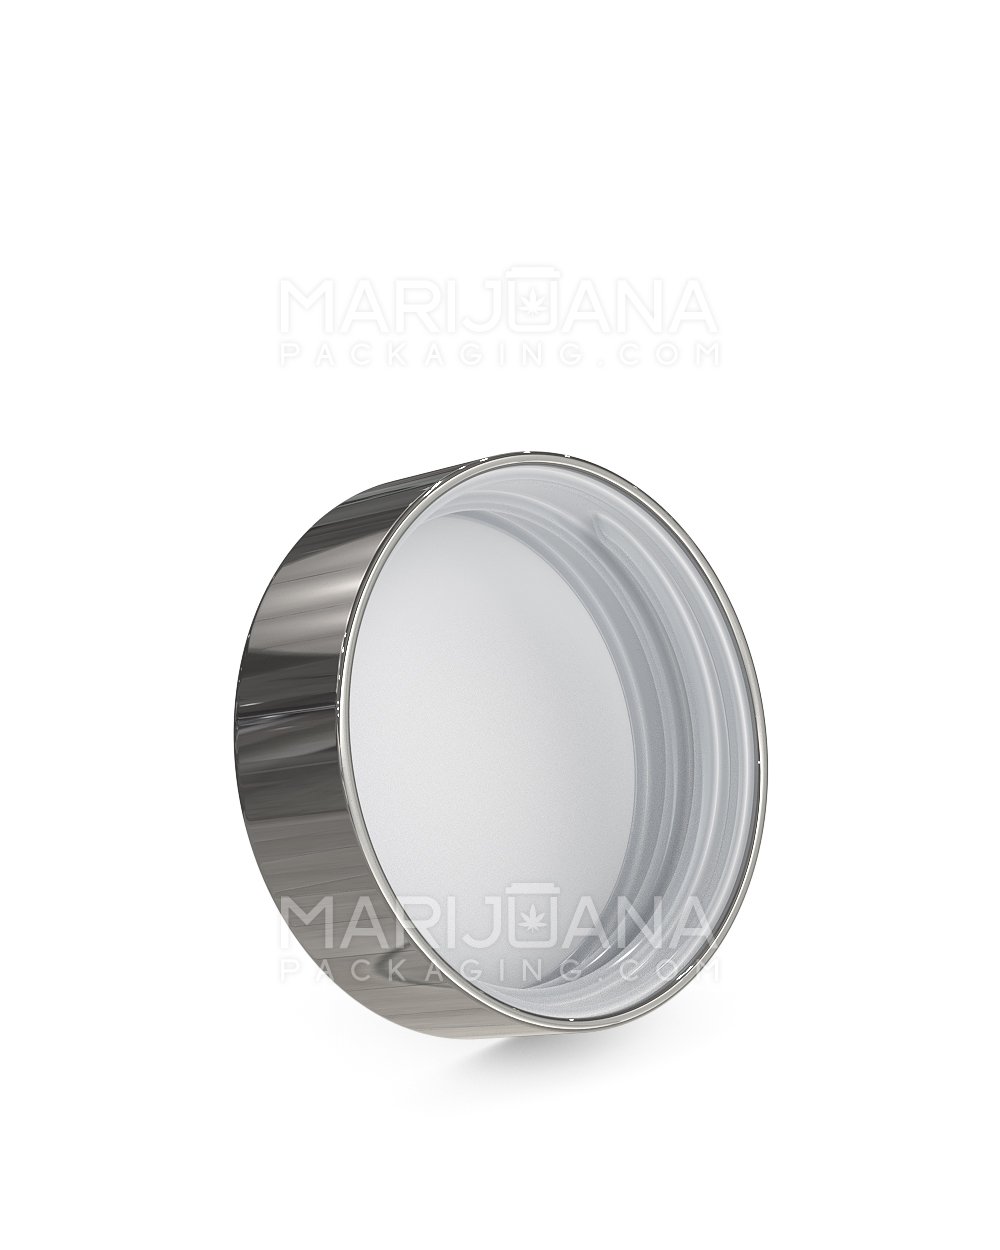 Child Resistant | Flat Push Down & Turn Plastic Caps w/ Foam Liner | 53mm - Glossy Silver - 120 Count - 2